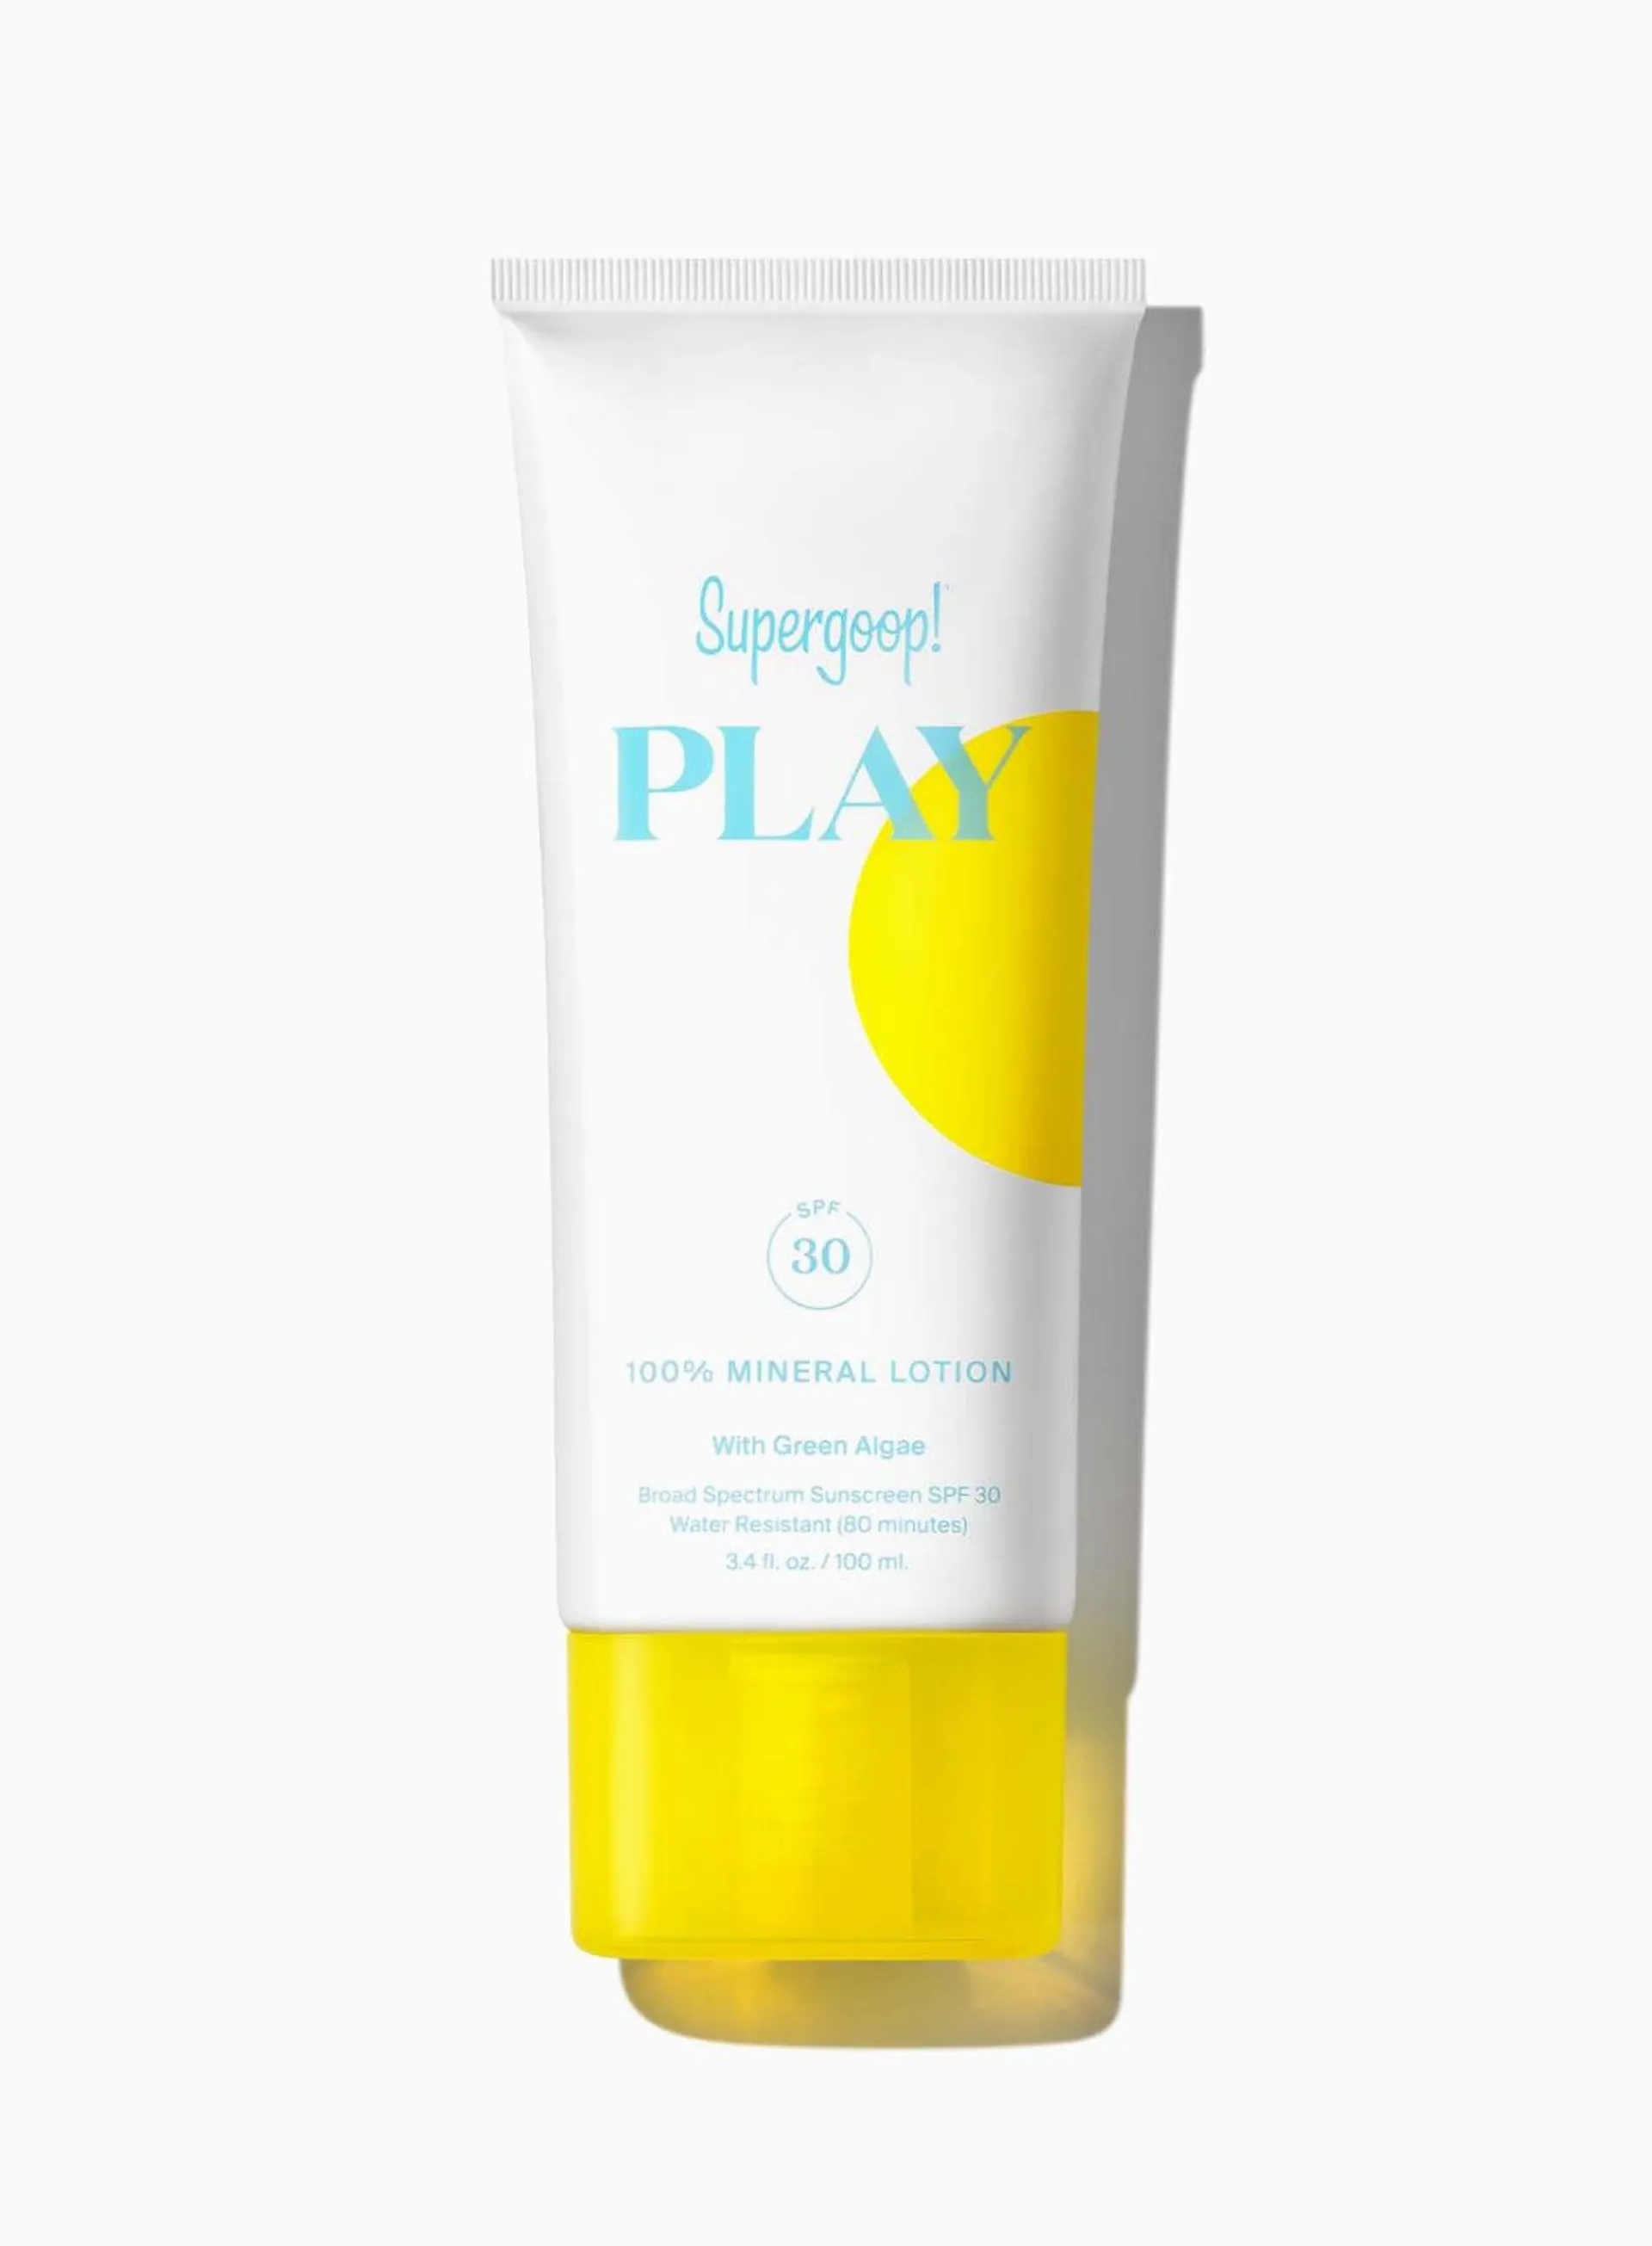 PLAY 100% Mineral Lotion SPF 30